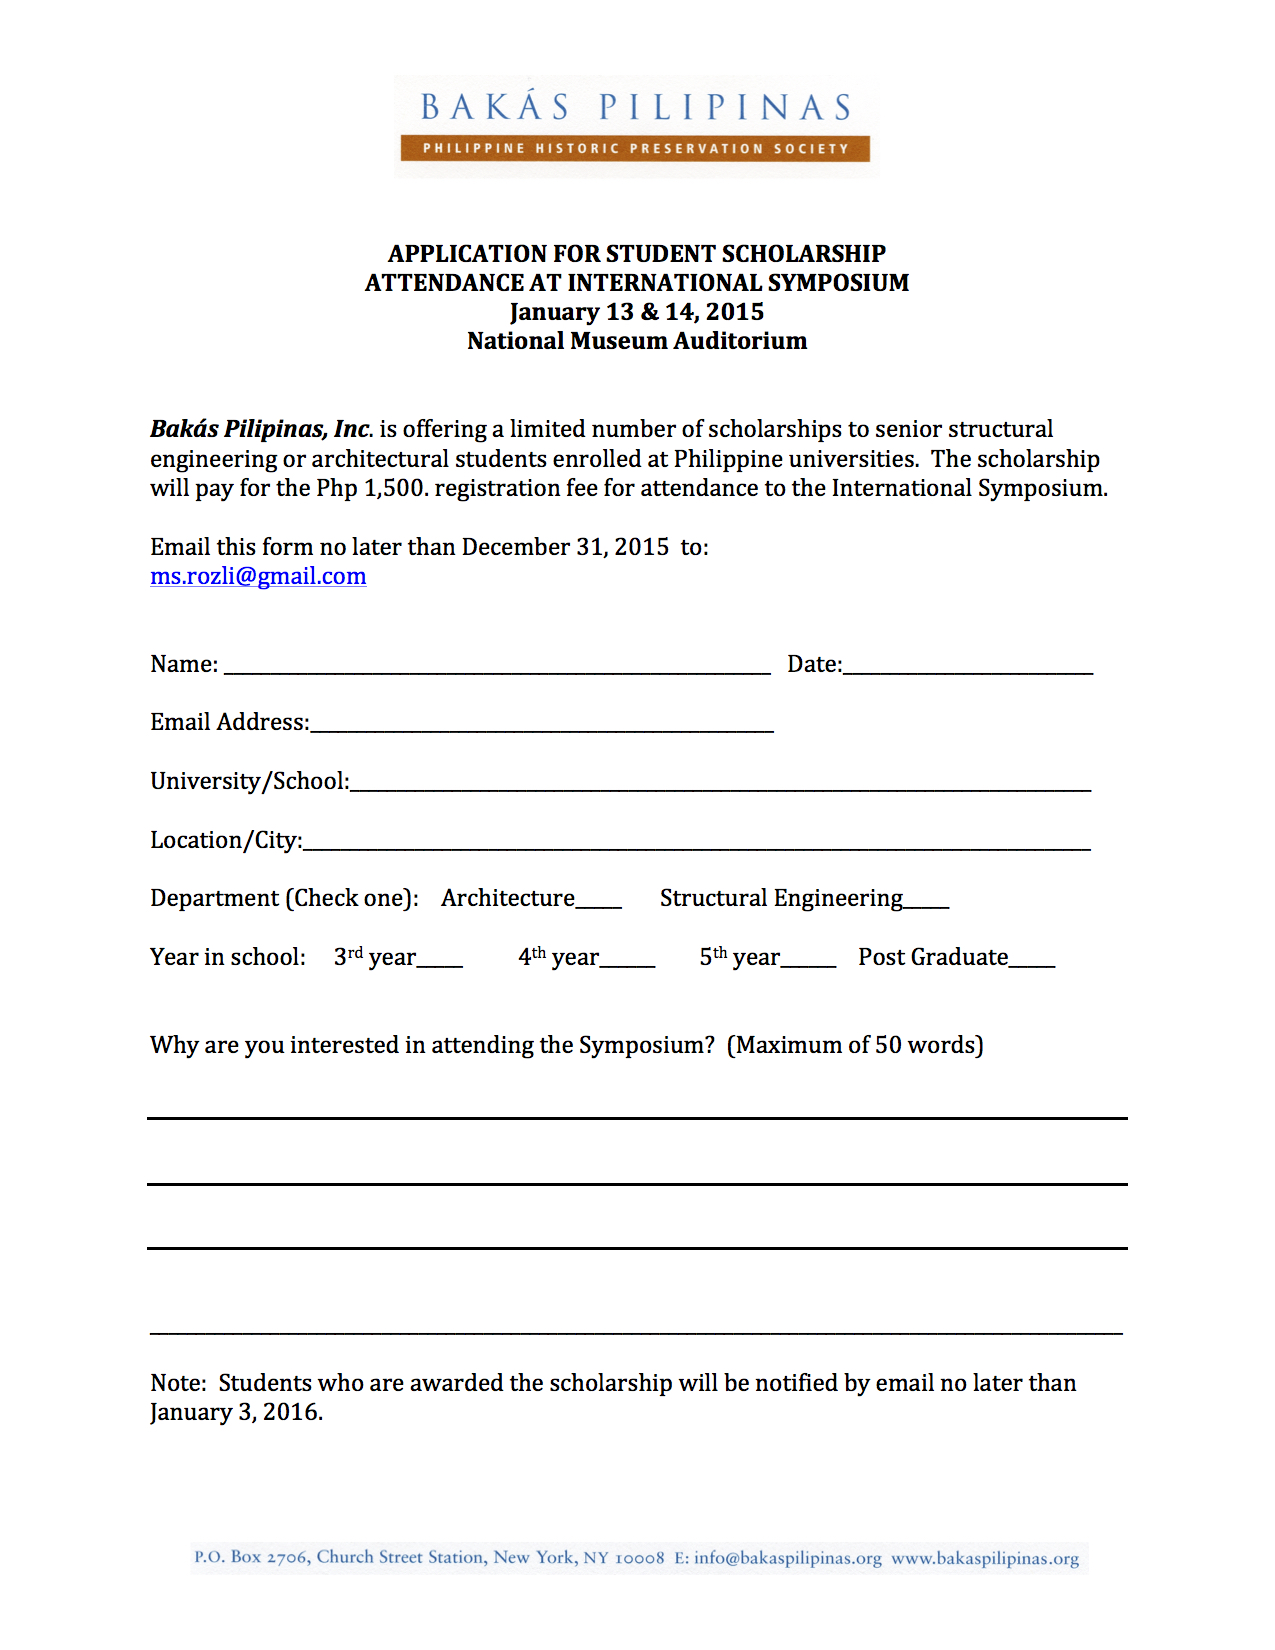 Application for Student Scholarship